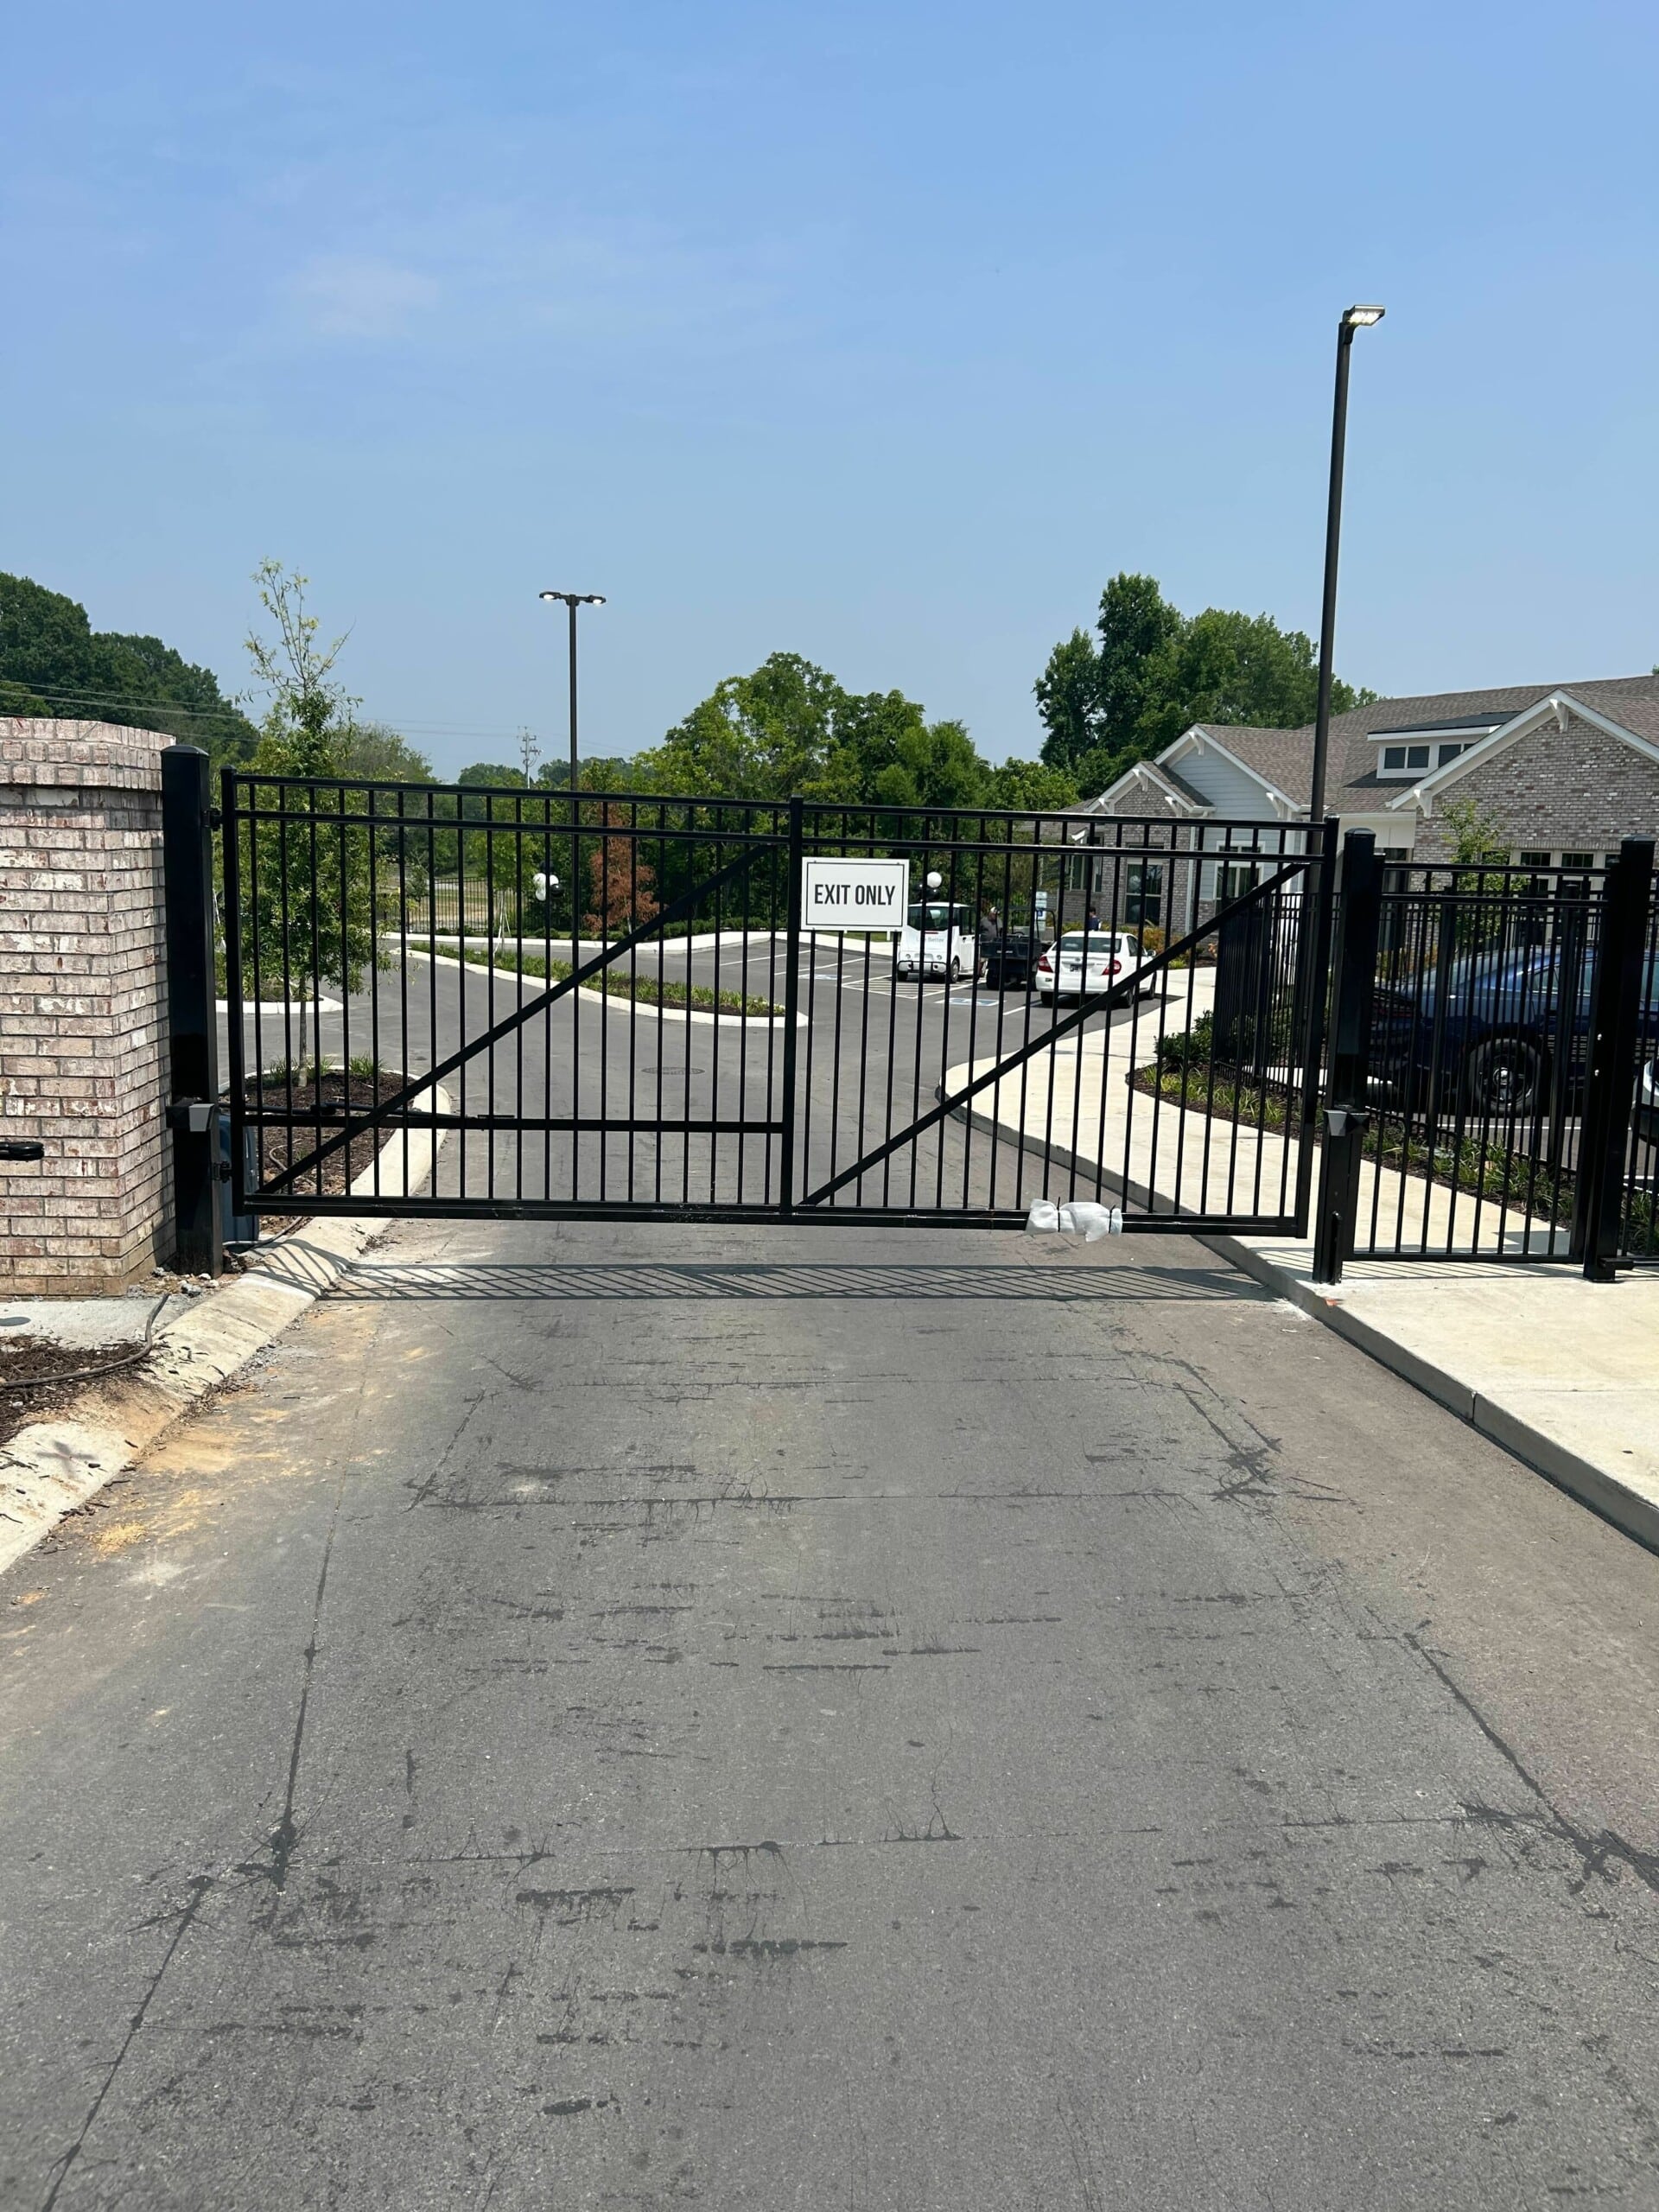 Entry access control gate installed at apartments by Guardian.